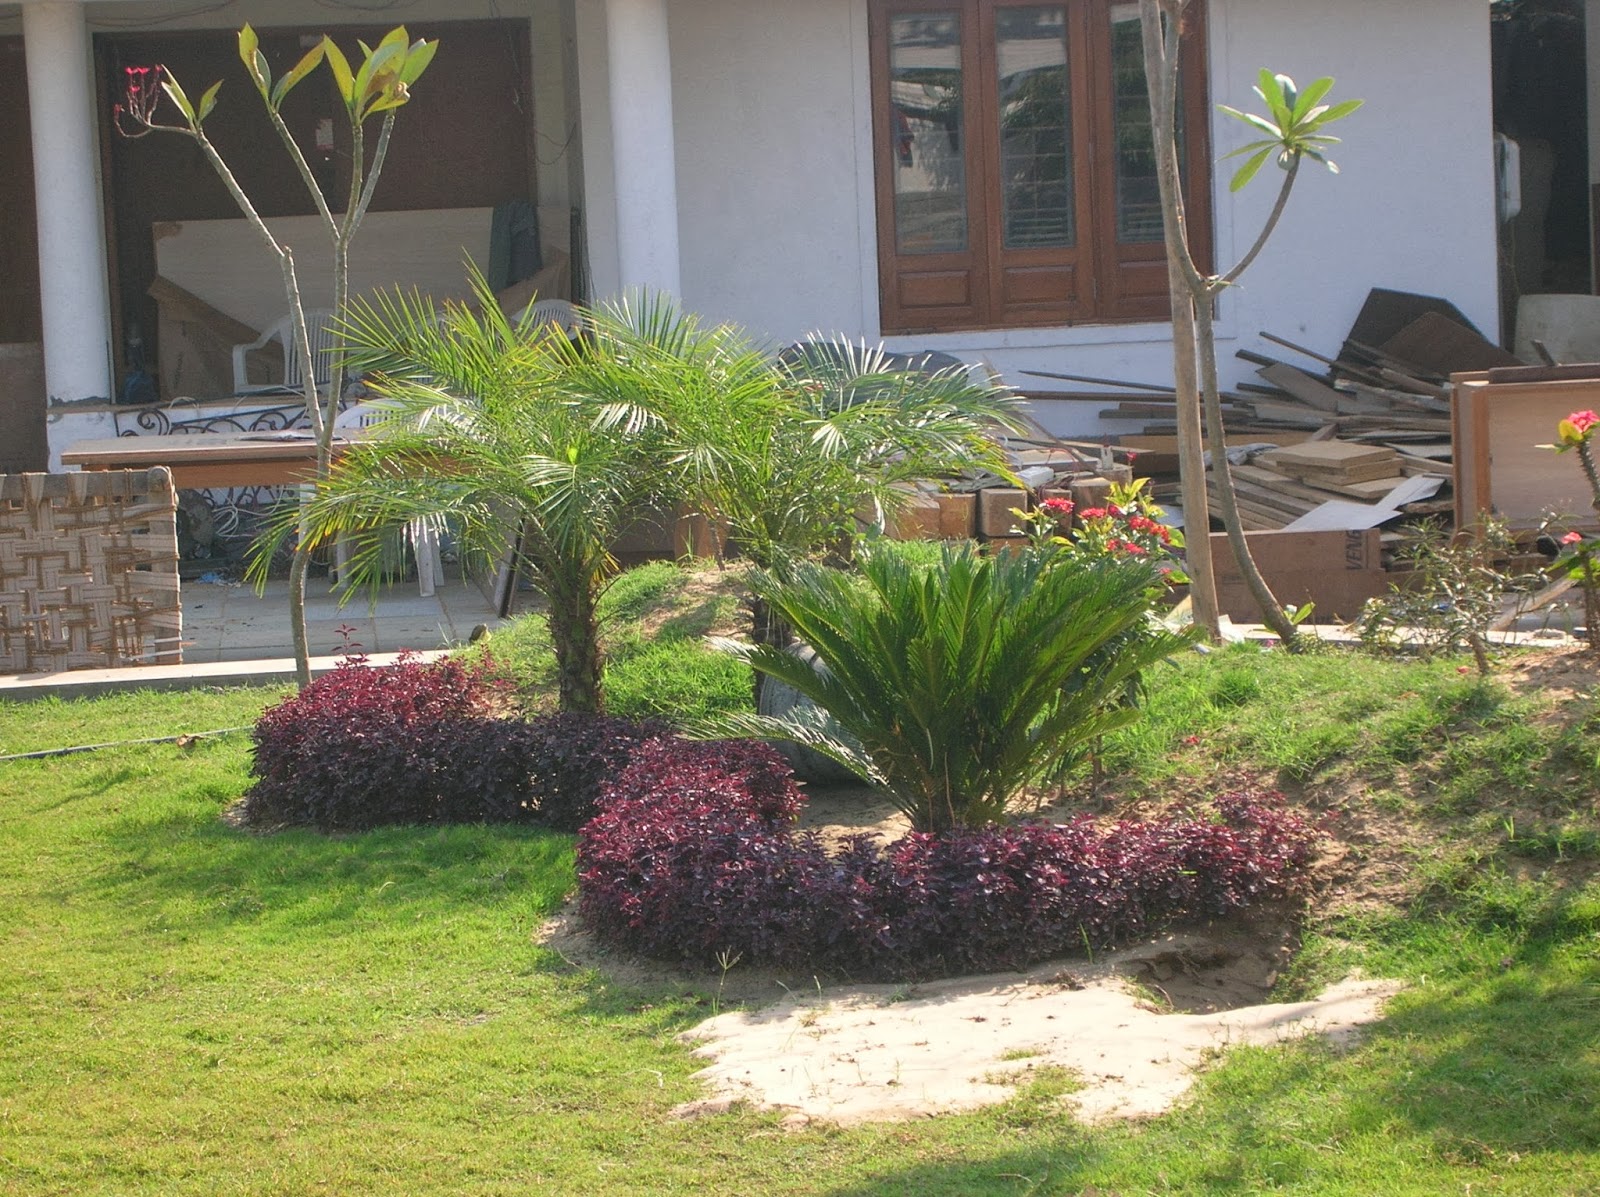 Bonsai Trees and Plants in Ahmedabad for Sale: garden design services